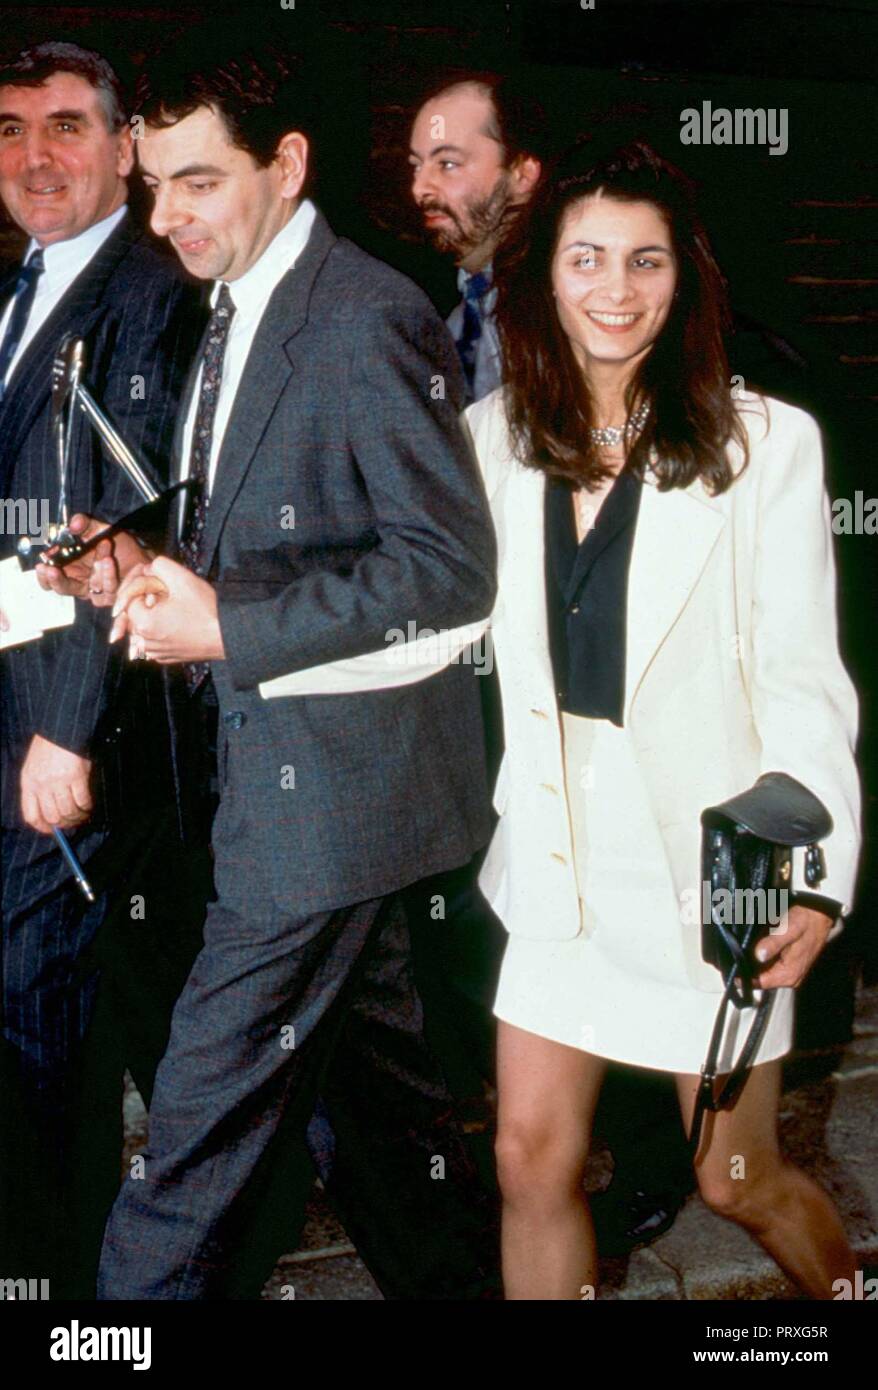 rowan atkinson and his wife sunetra sastry the couple have been married since 1990 and have two children picture by credit lmk mediapunch ref lmk11 lib98 190205 captioned 19th february 2005 credit lmk mediapunch PRXG5R